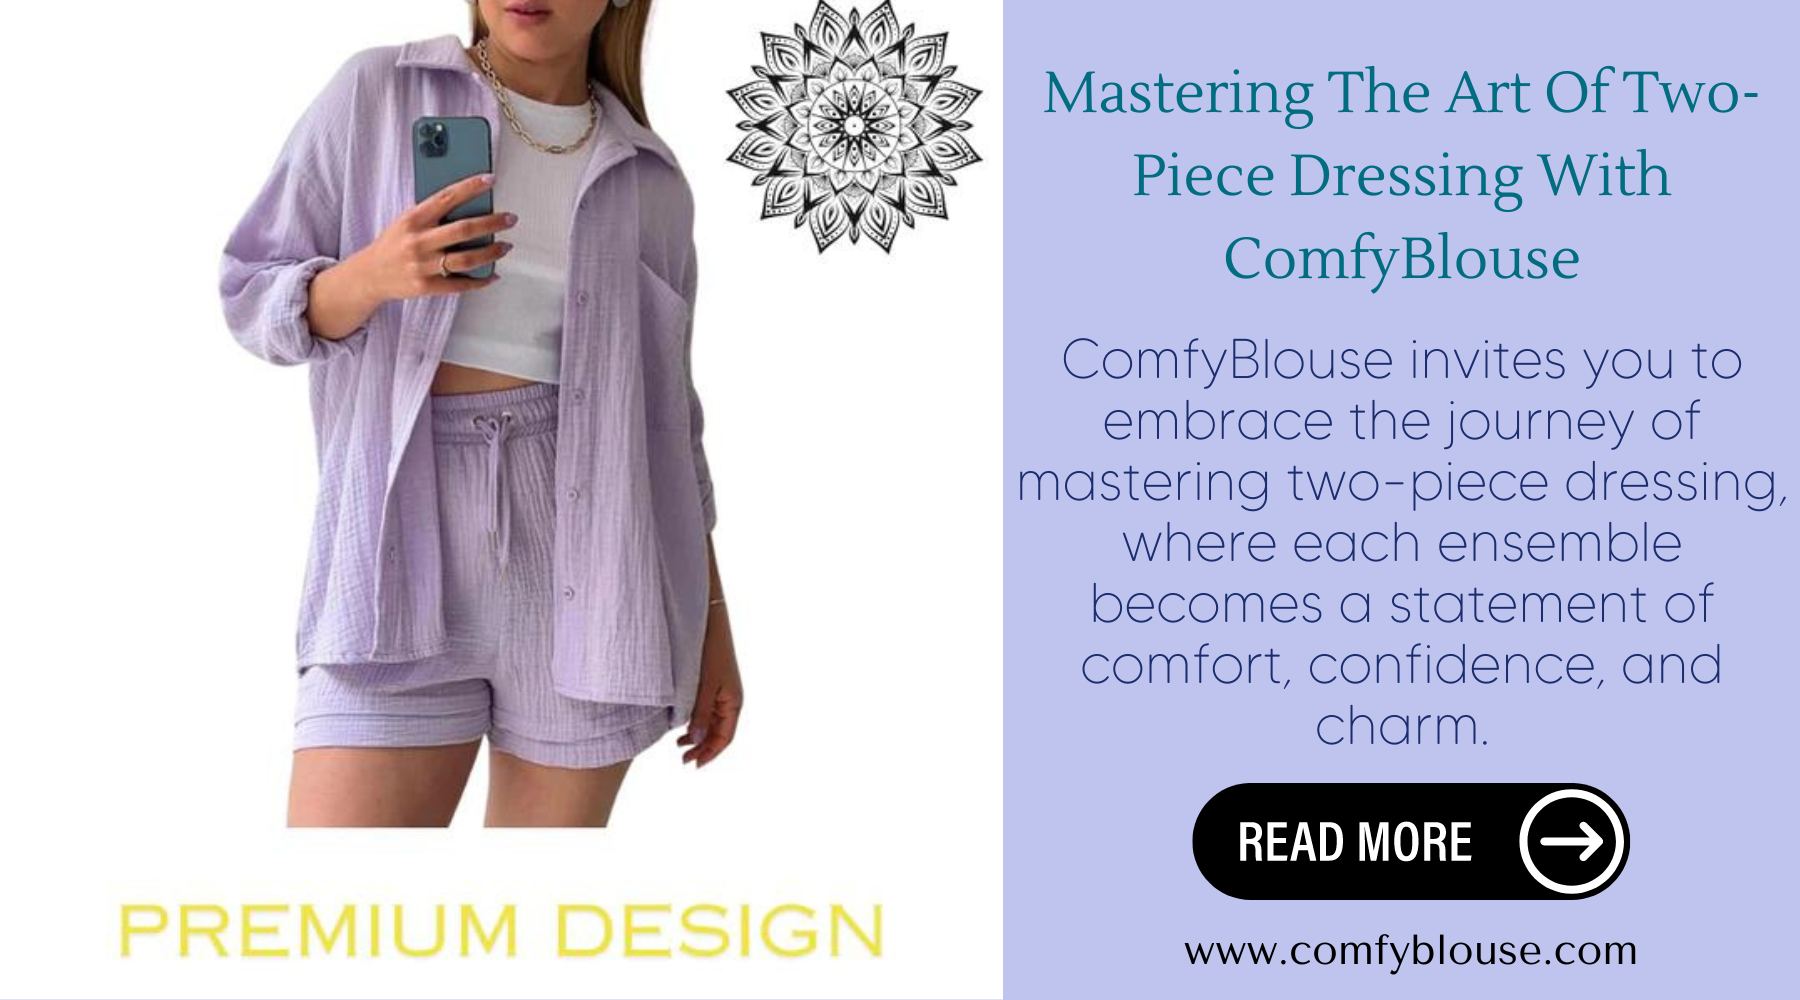 Mastering The Art Of Two-Piece Dressing With ComfyBlouse